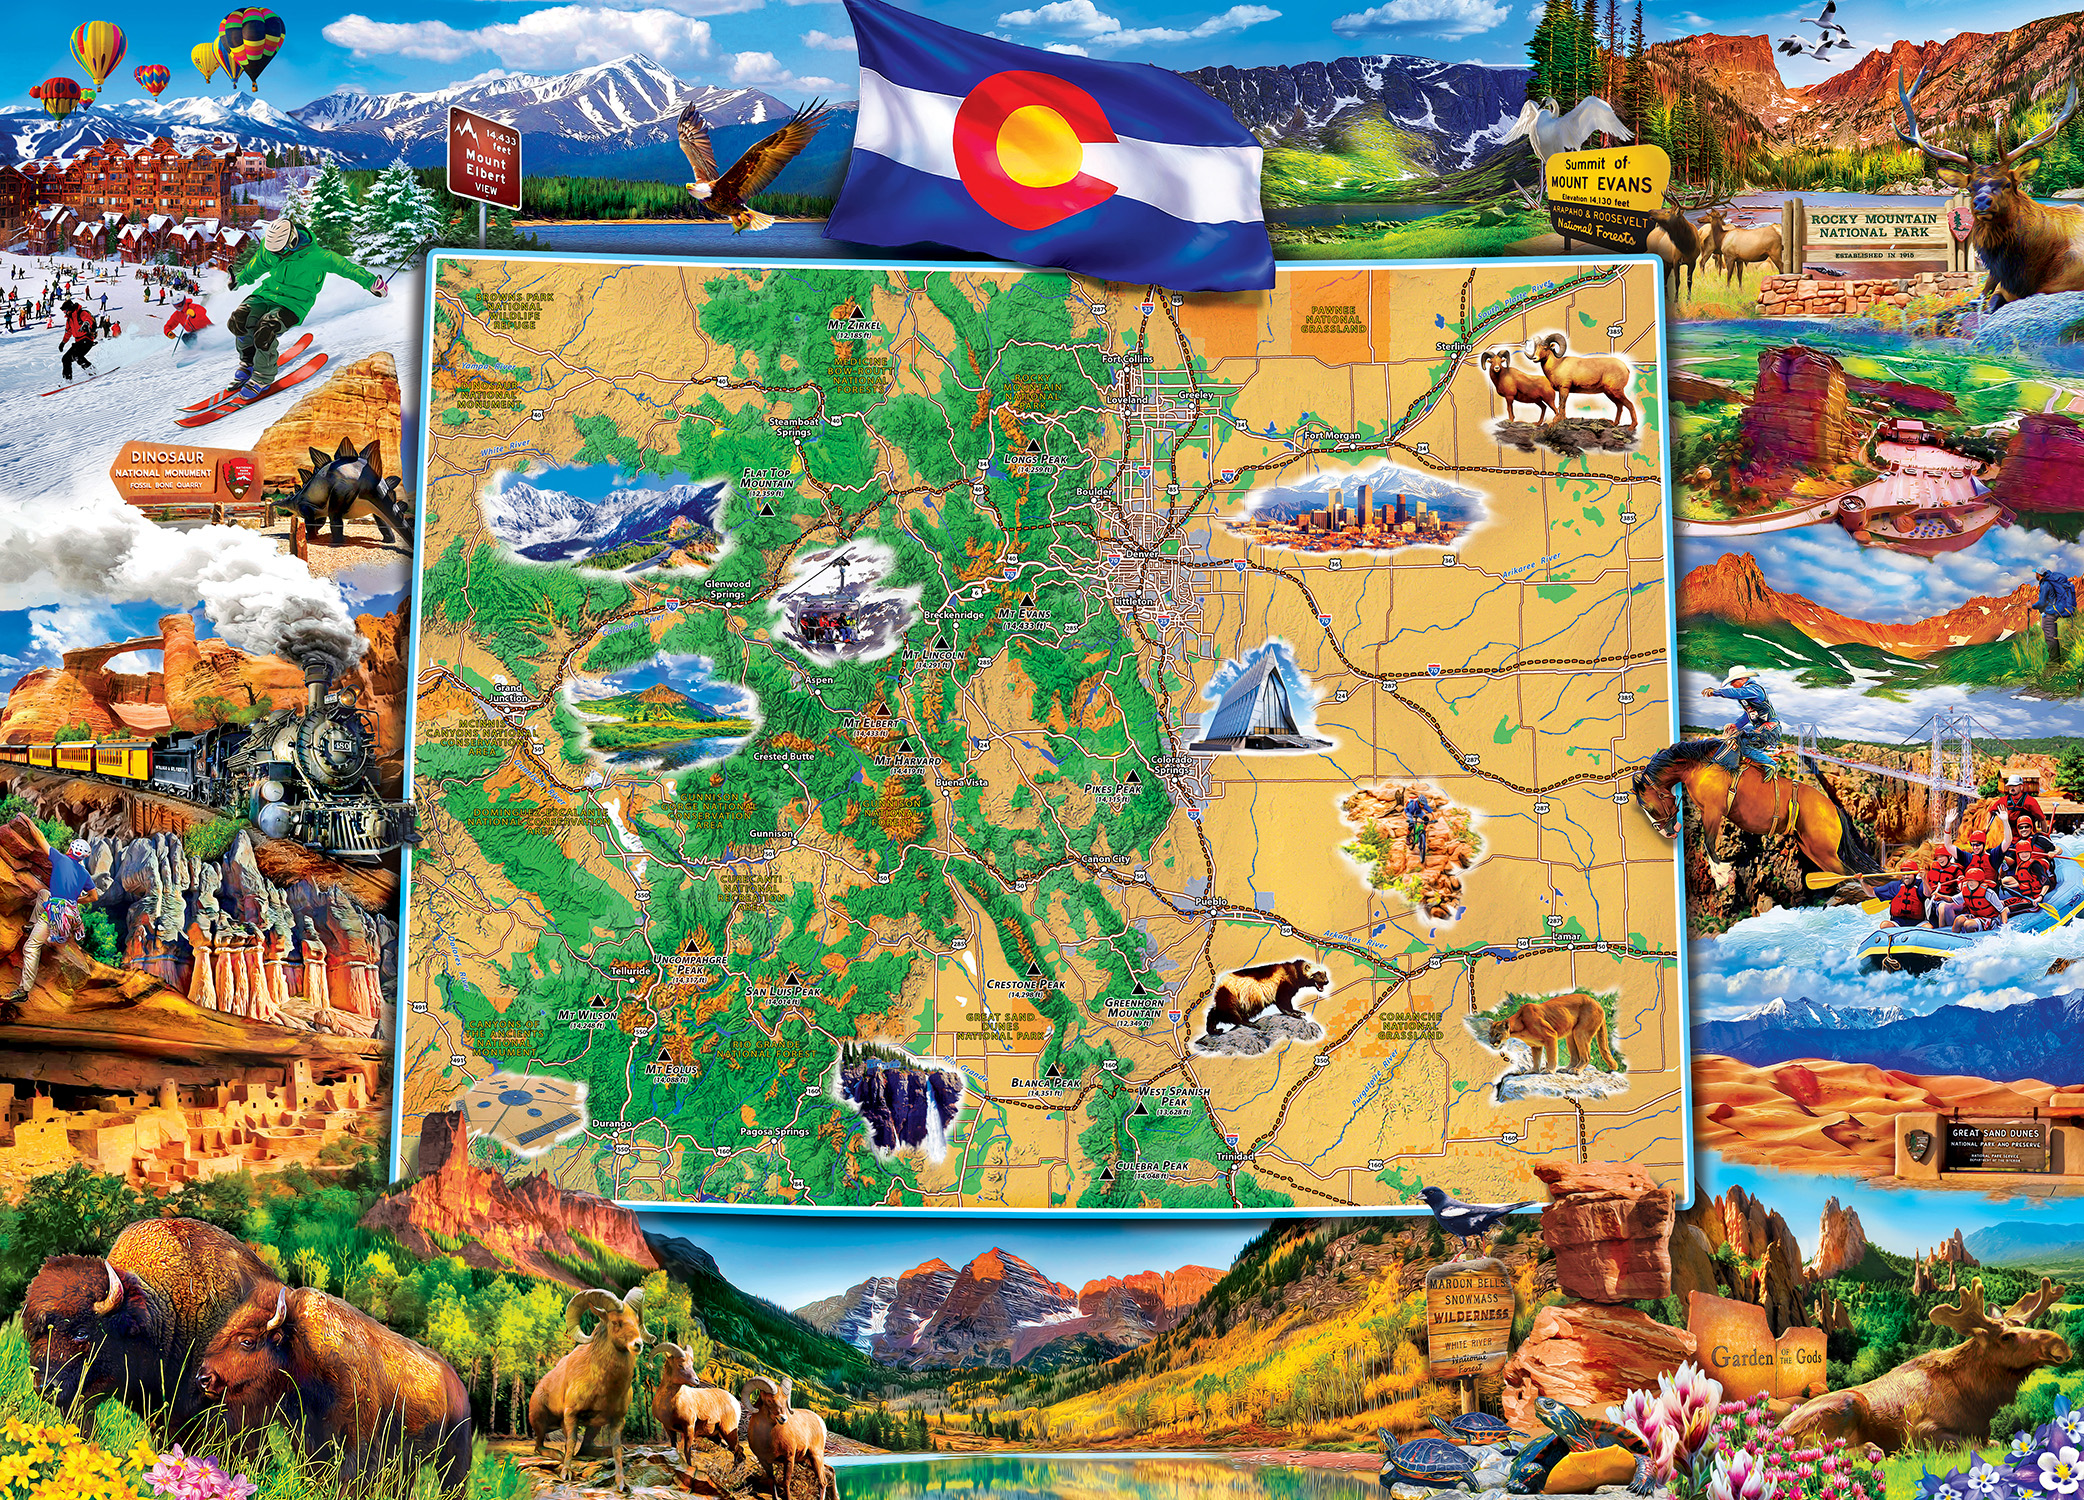 Colorado Map - Scratch and Dent Animals Jigsaw Puzzle